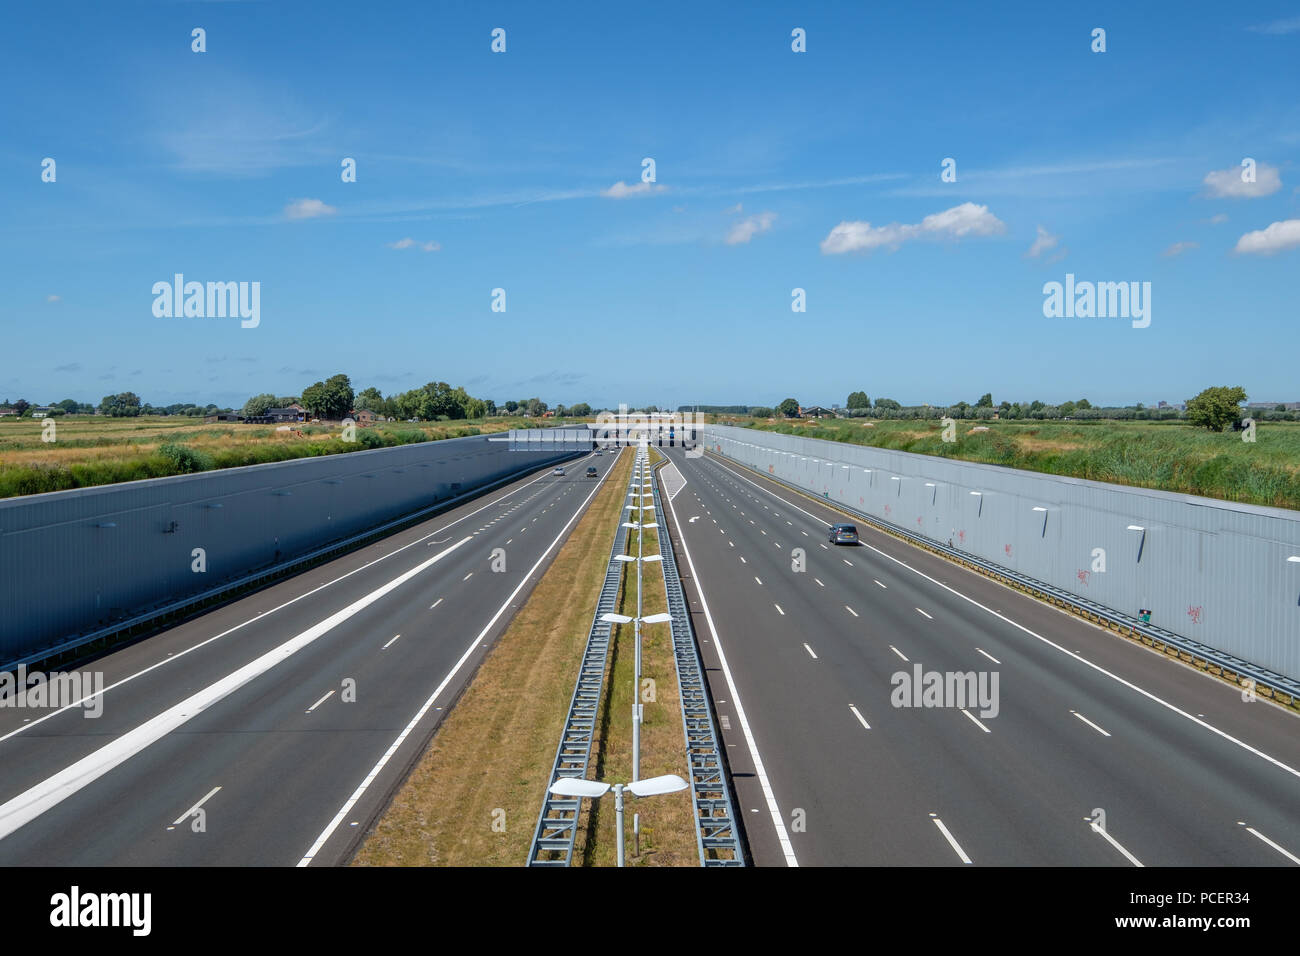 Modern deepered highway A4, Delft-Schiedam, Netherlands. This modern highway is built in a deepened location to save the Midden-Delfland nature reserv Stock Photo